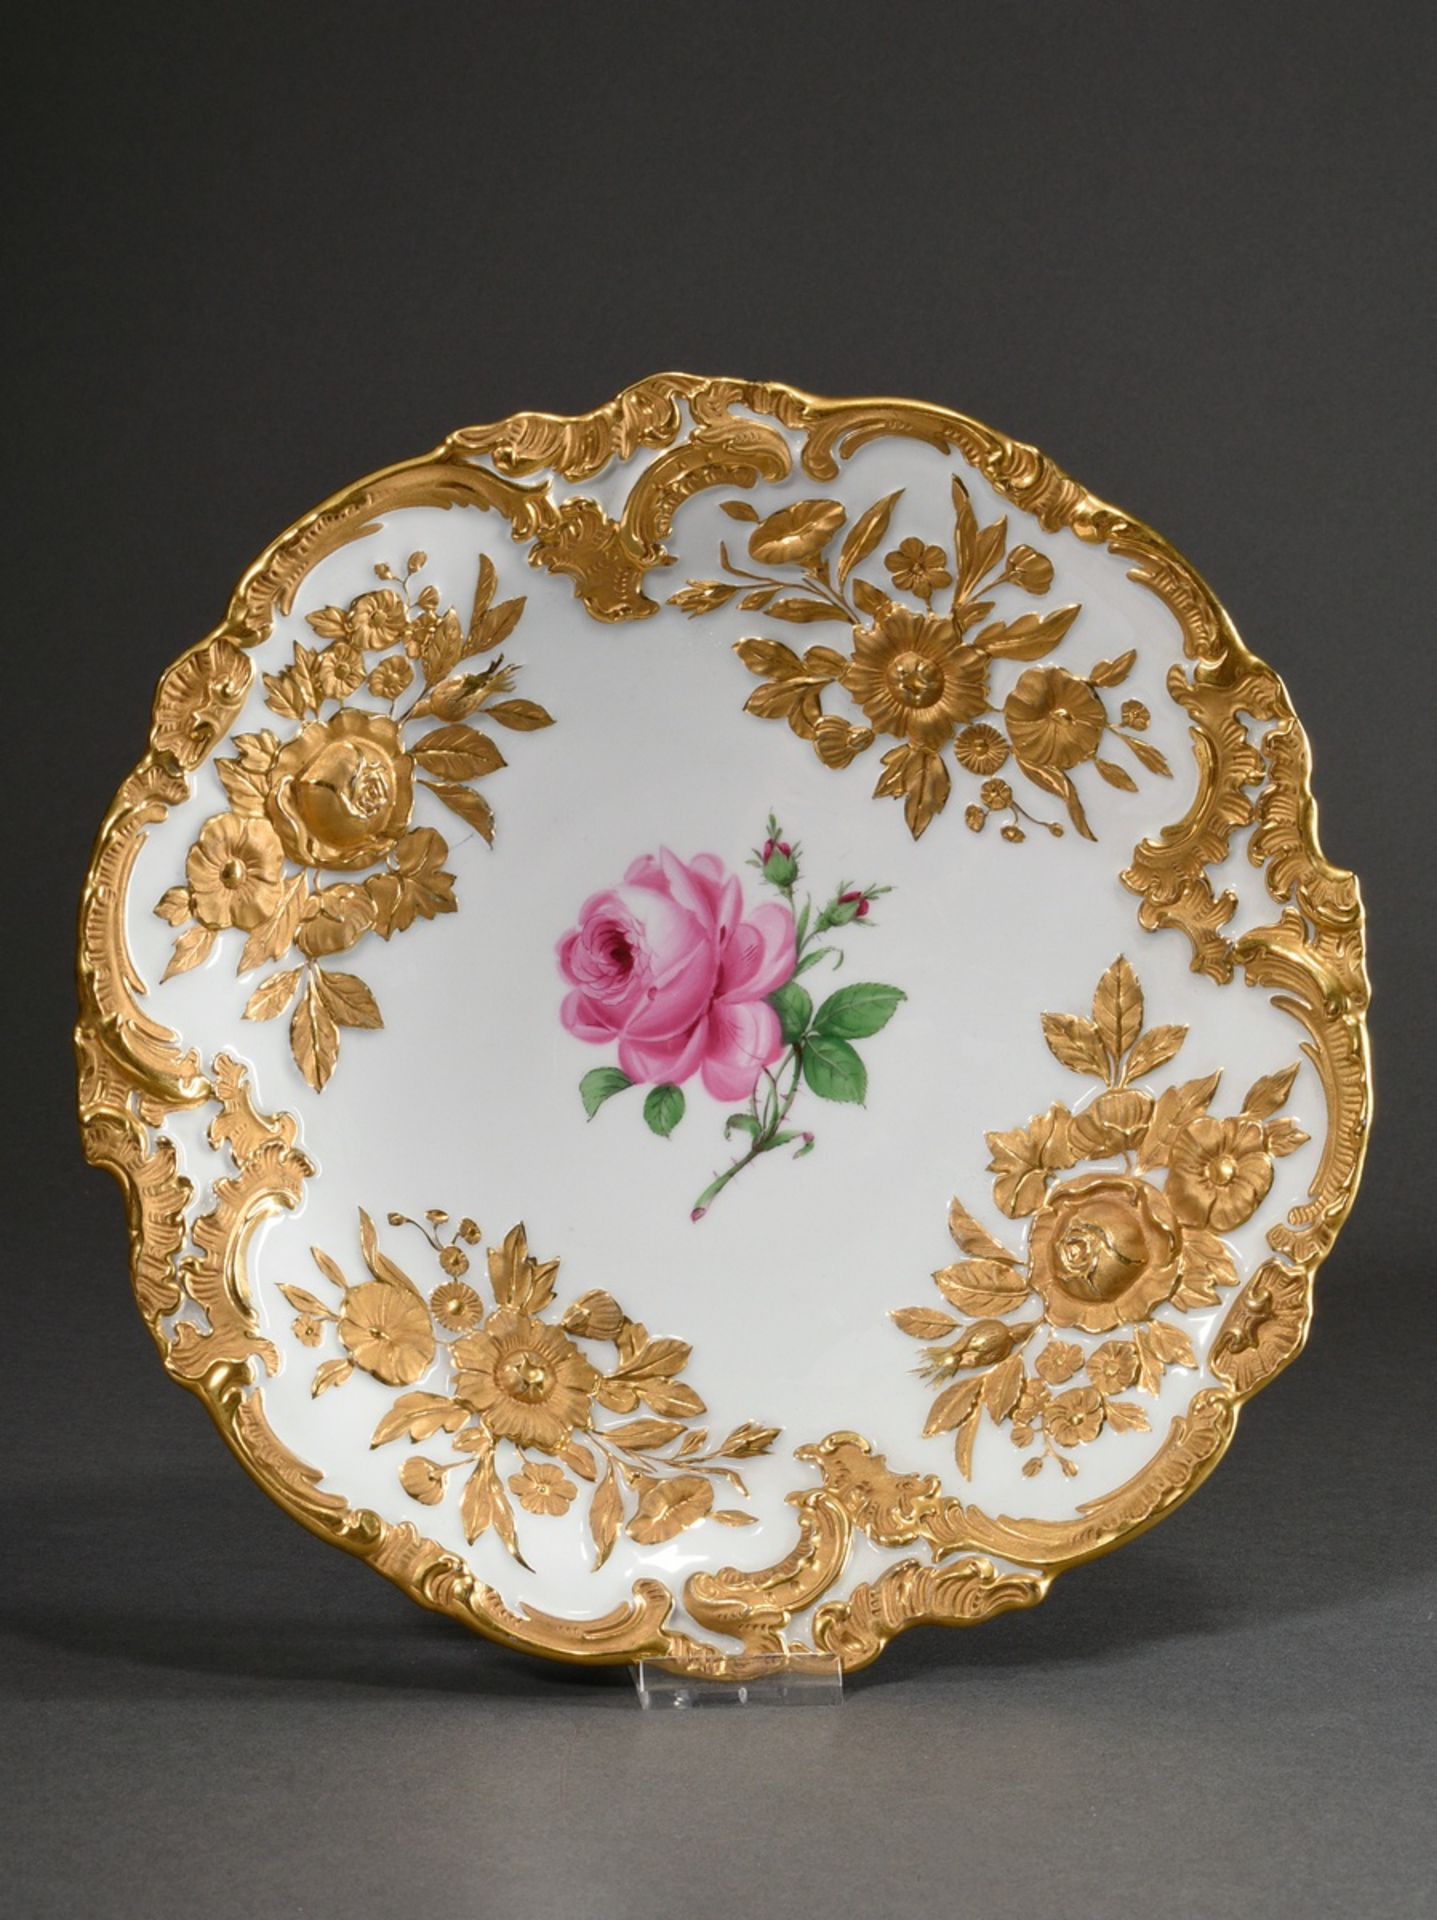 Magnificent Meissen "Rose" plate with richly gilded relief rim, Pfeifer period 1924-1934, model no.